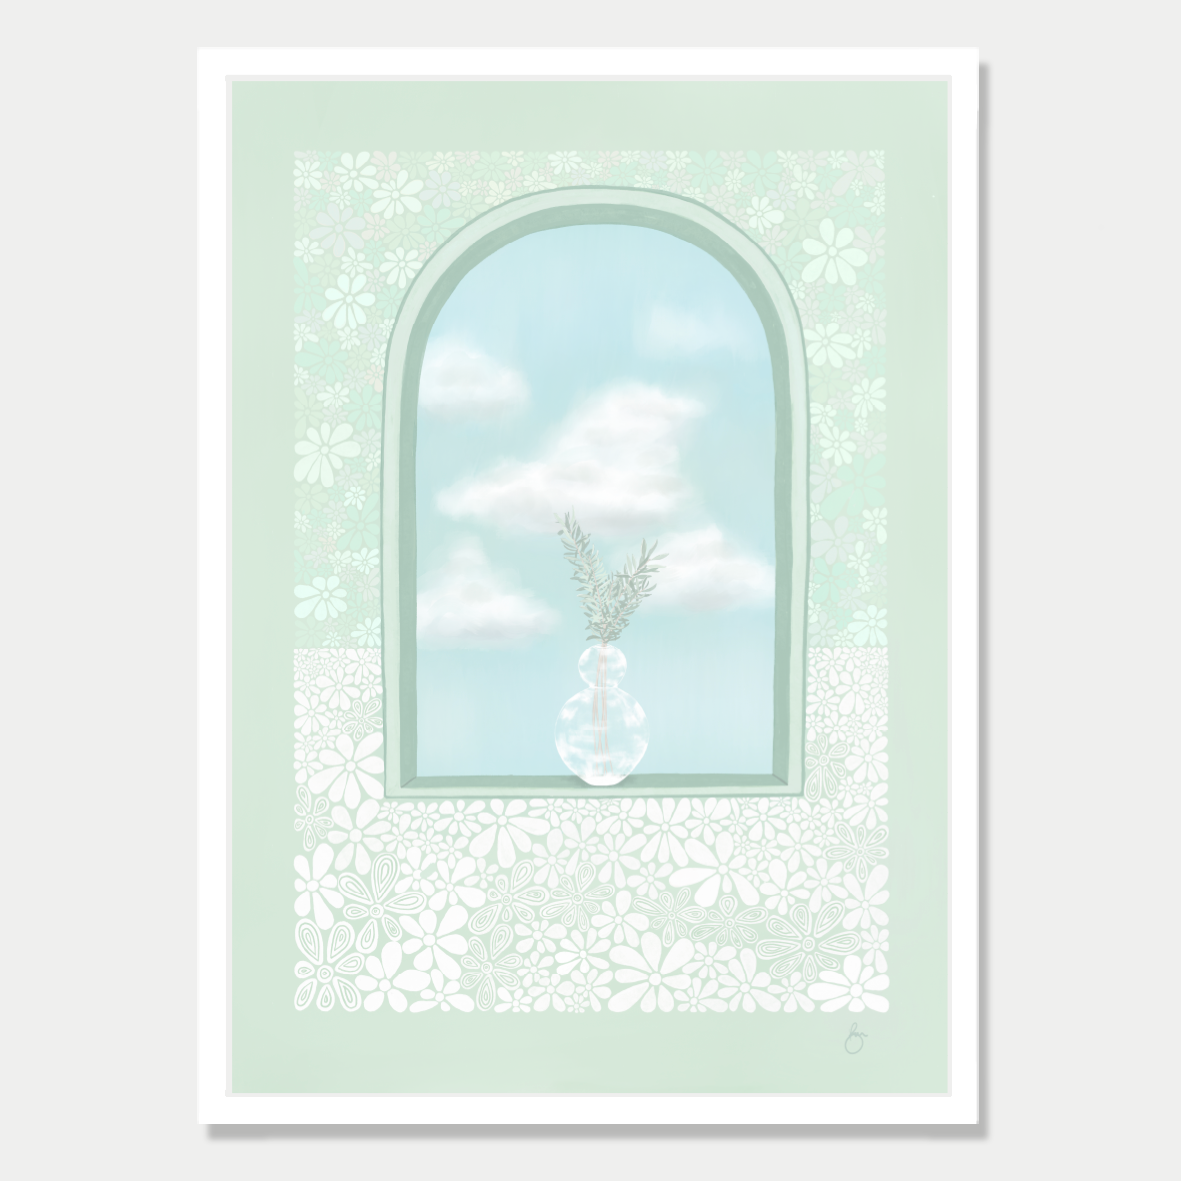 Art print of an arched window with a plant sitting in it and a view of fluffy clouds, in a pastel mint colour palette, by Bon Jung. Printed in New Zealand by endemicworld and framed in white.